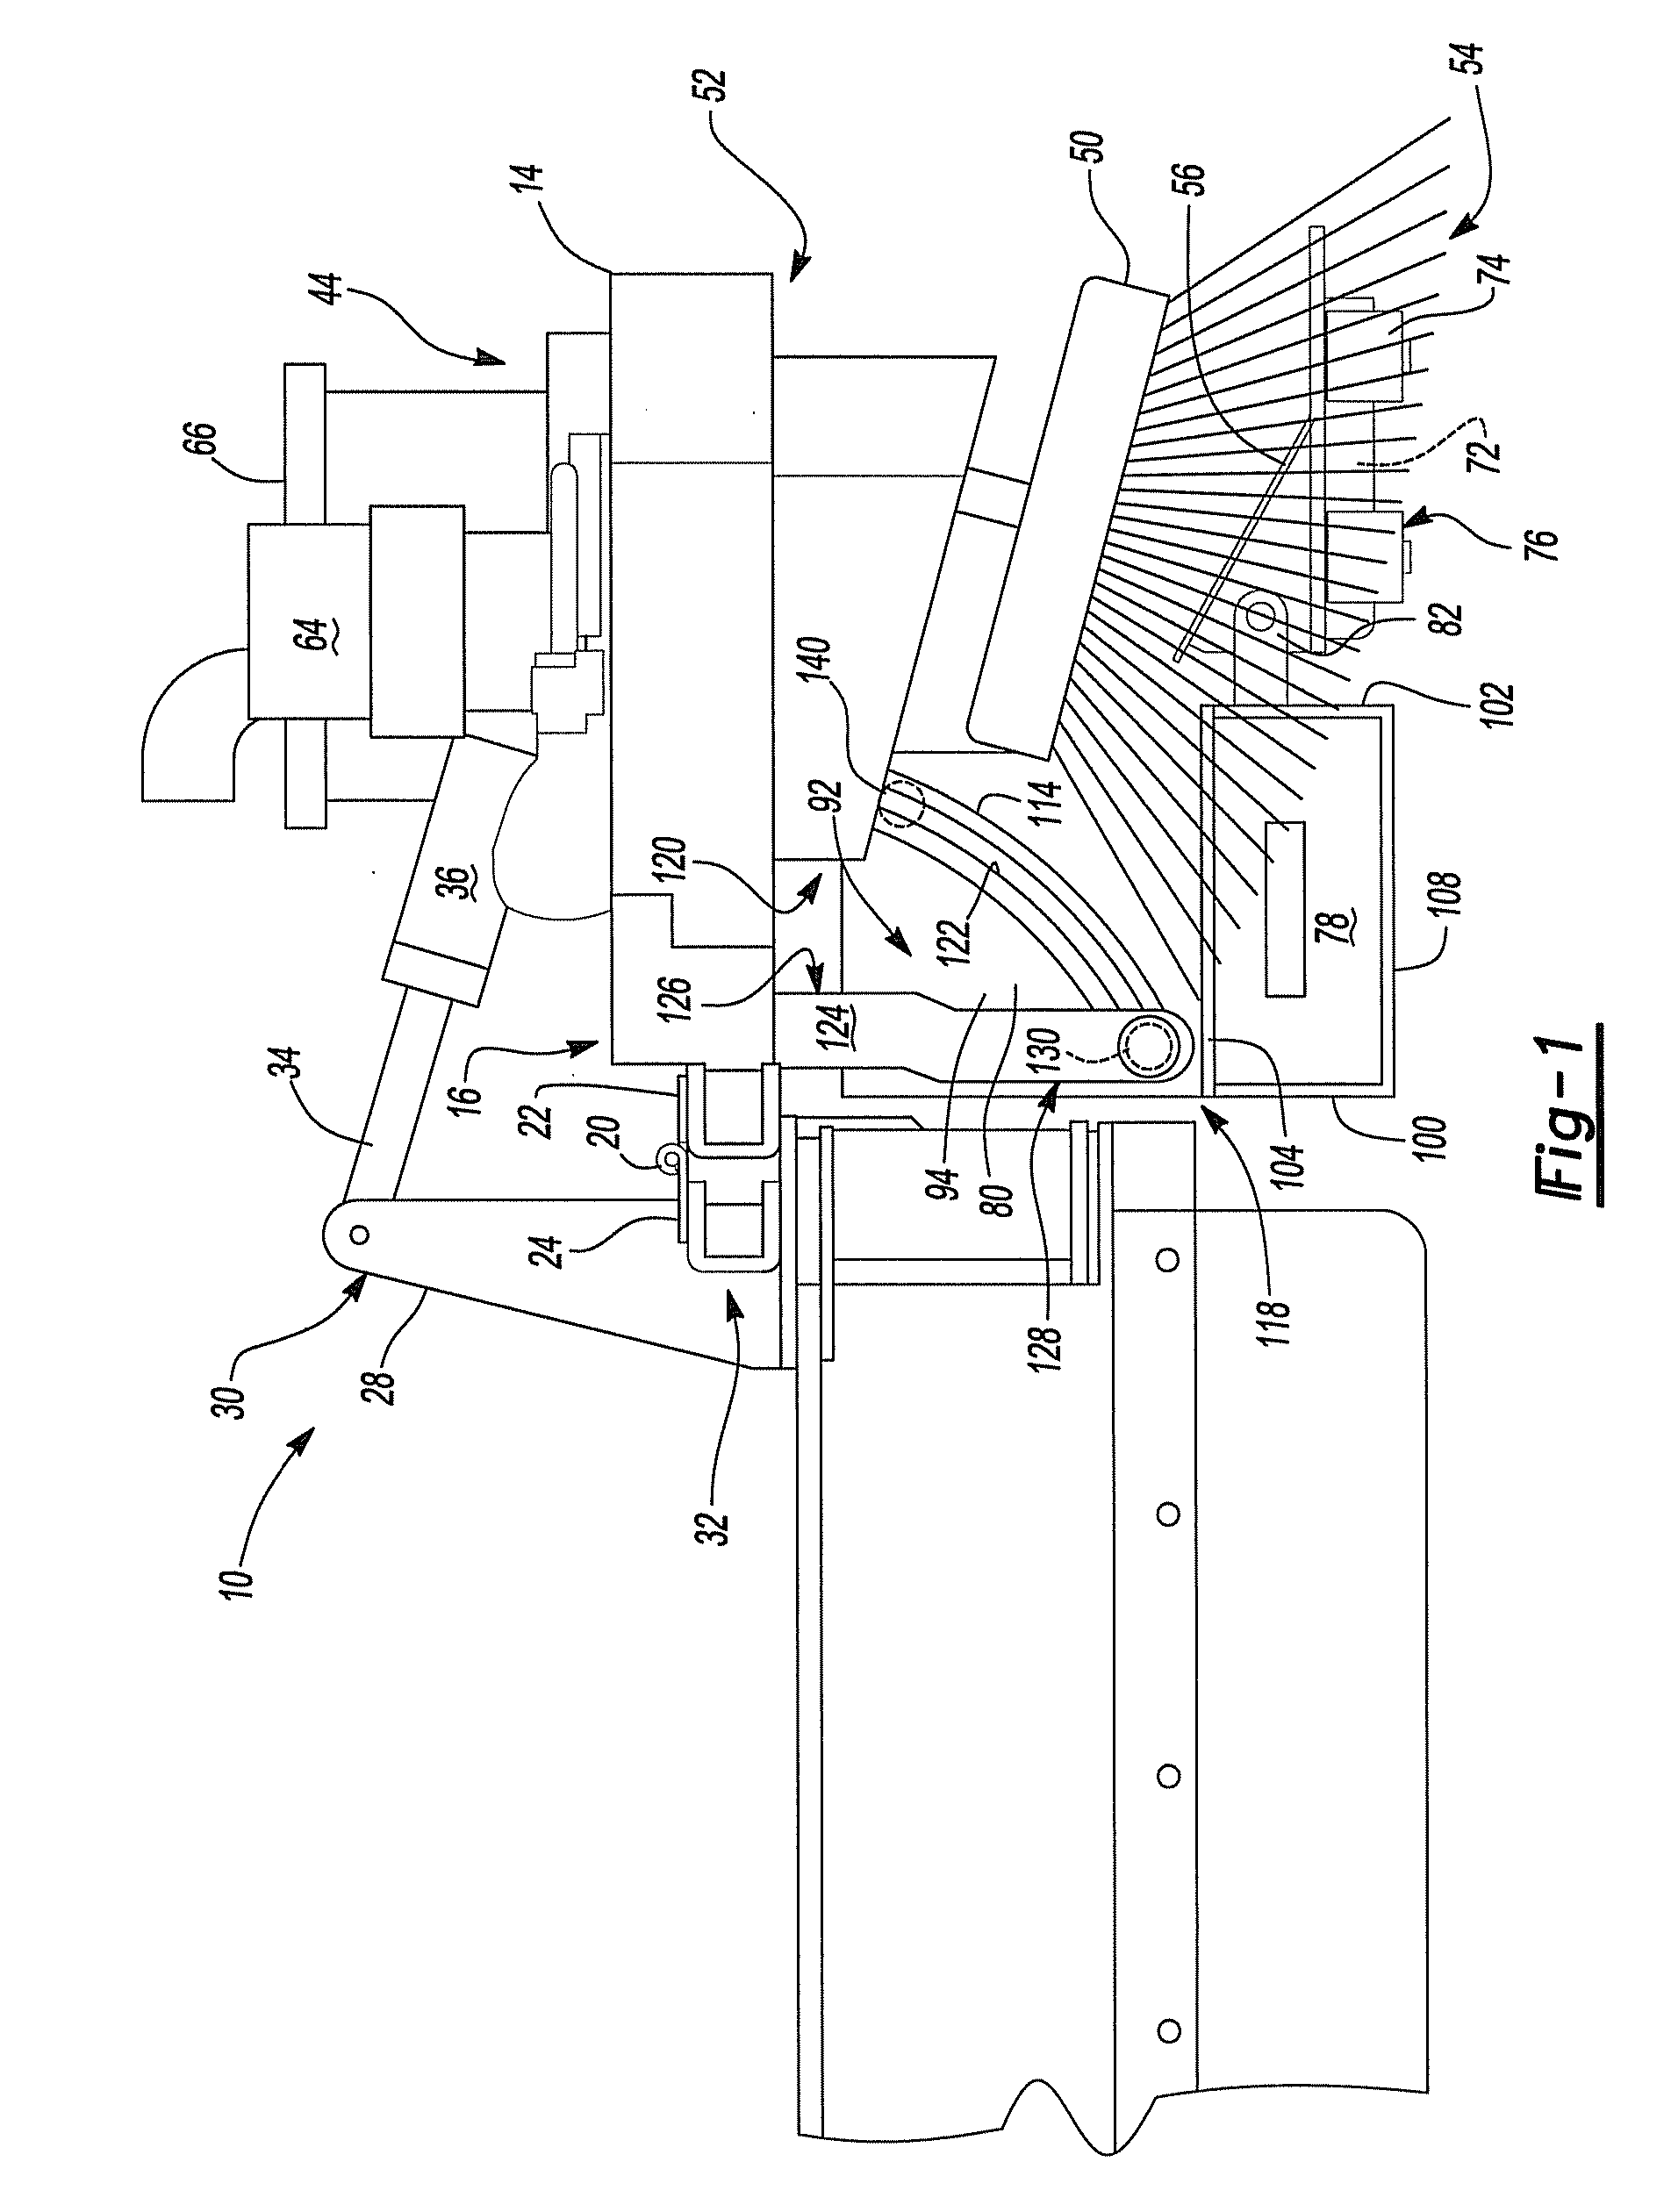 Brush and vacuum assembly and method of use